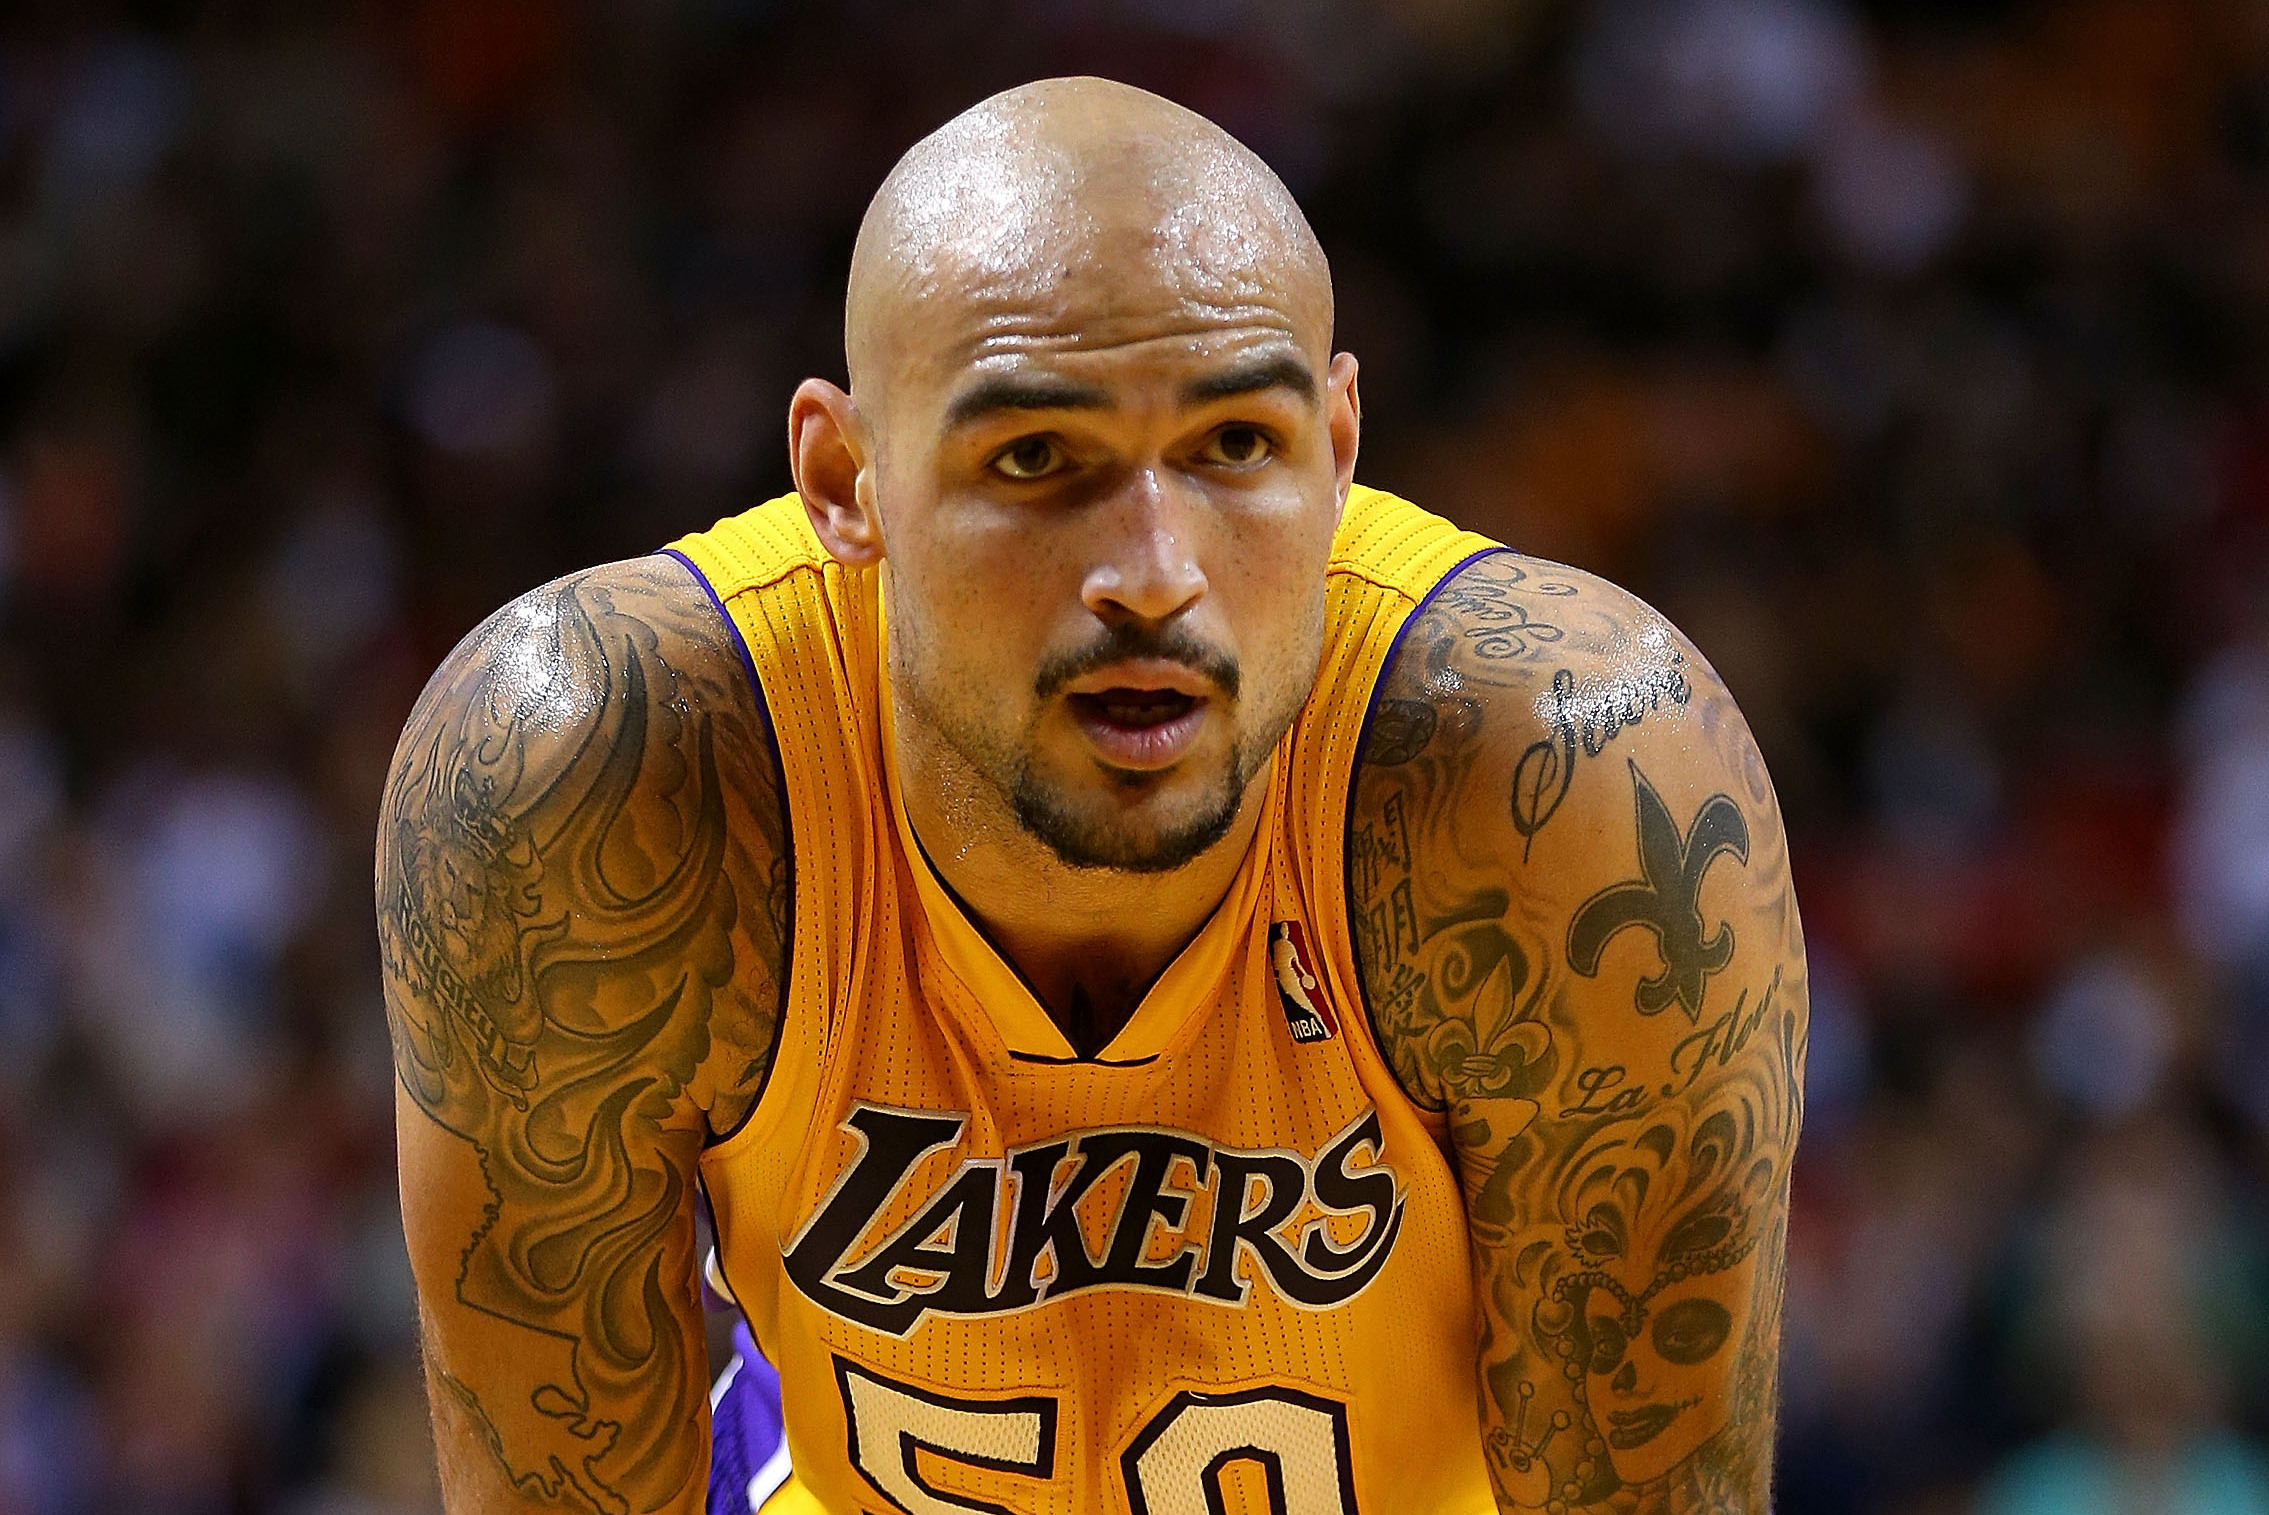 Pelicans center Robert Sacre not shy about showing his love for